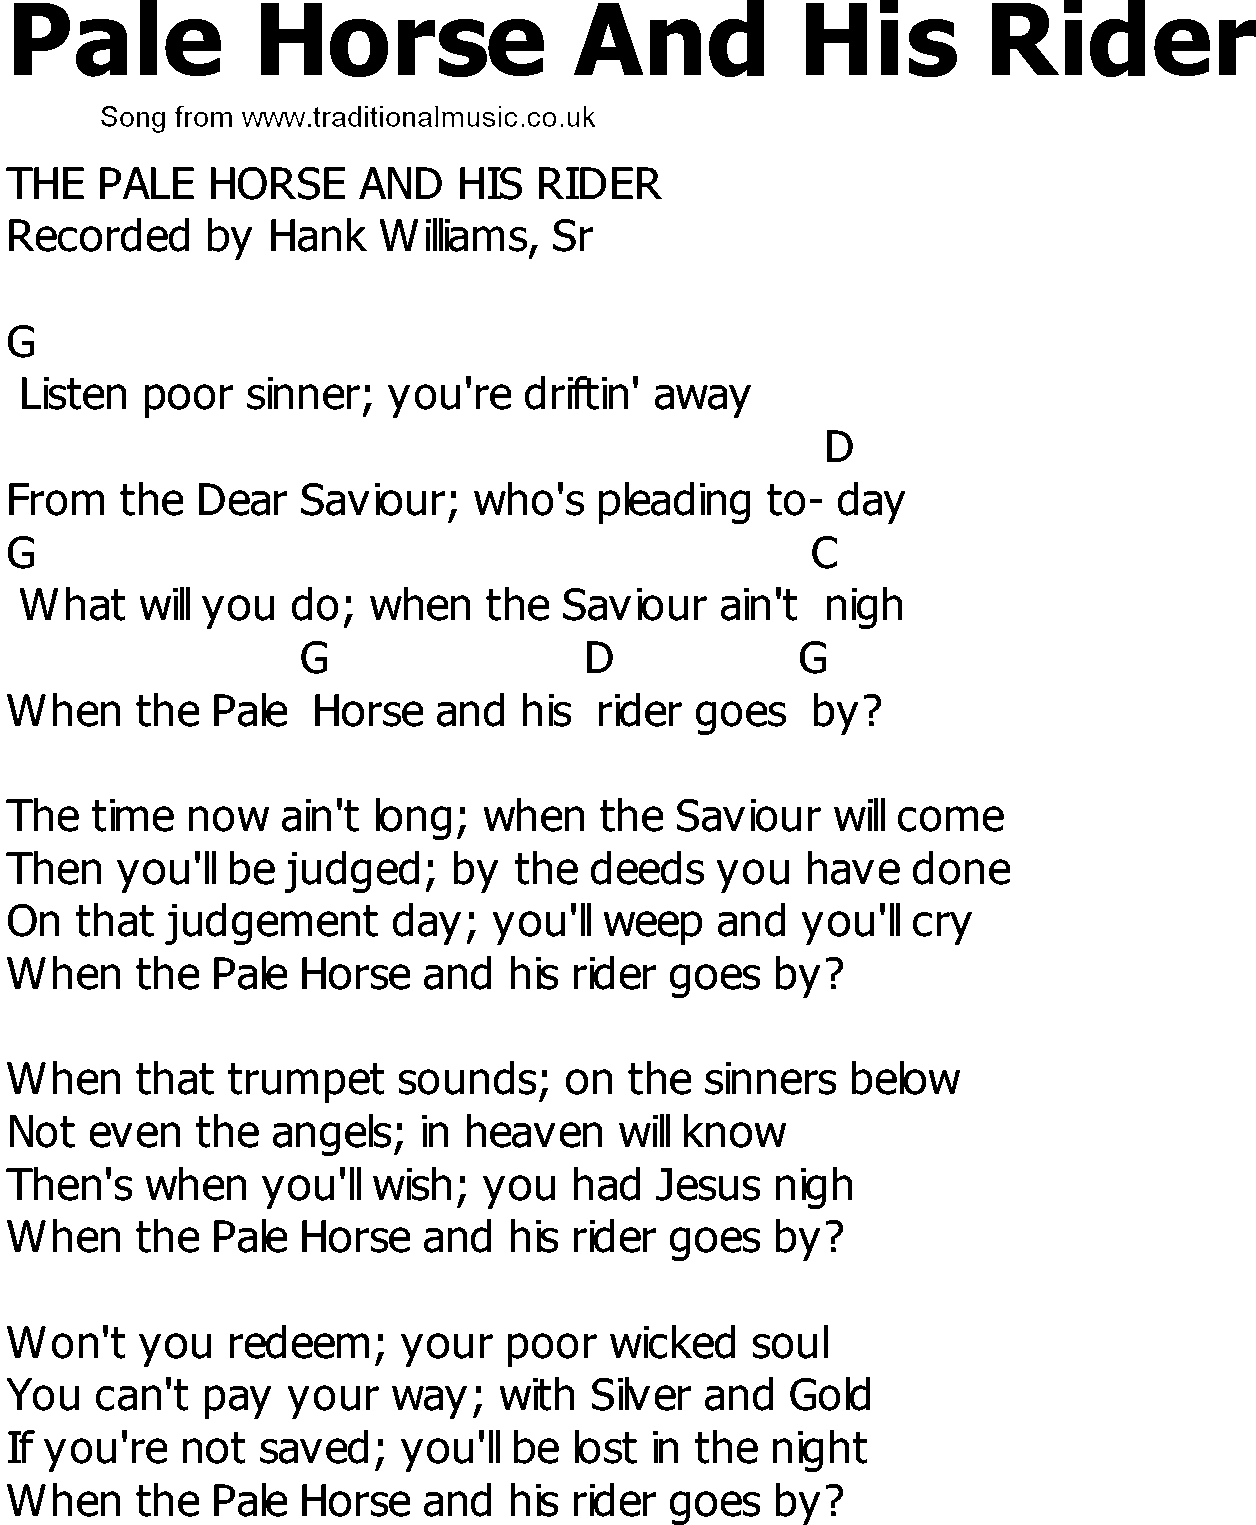 Old Country song lyrics with chords - Pale Horse And His Rider